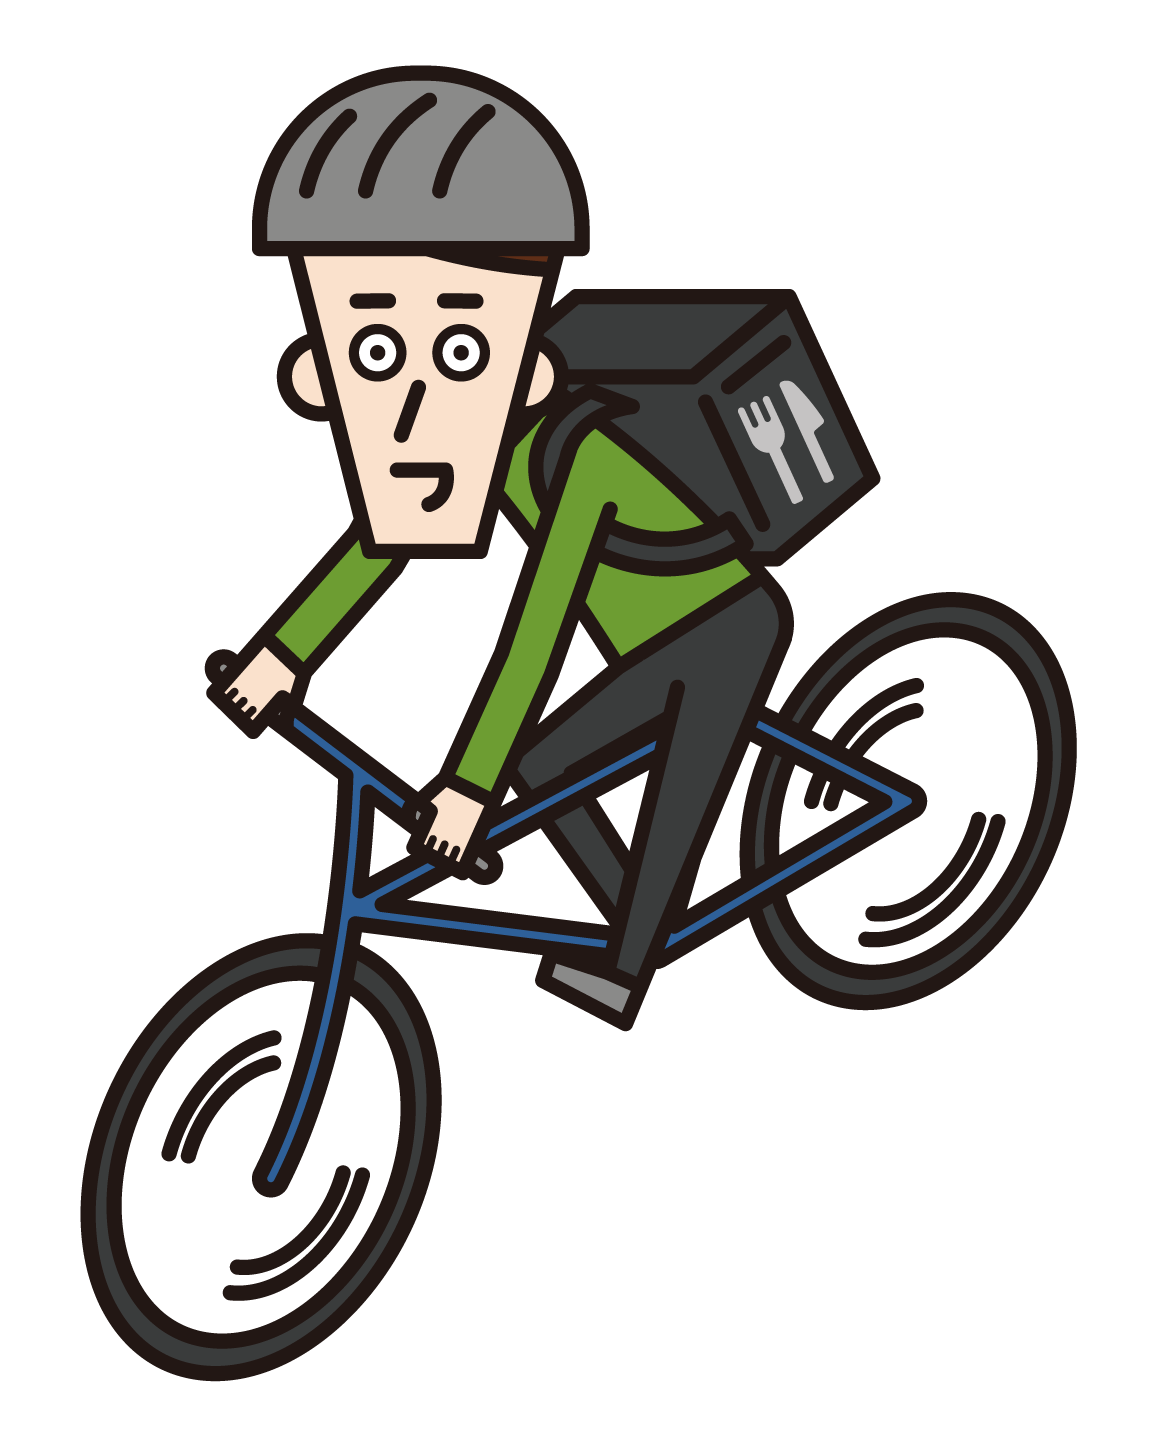 Illustration of a man delivering food on a bicycle